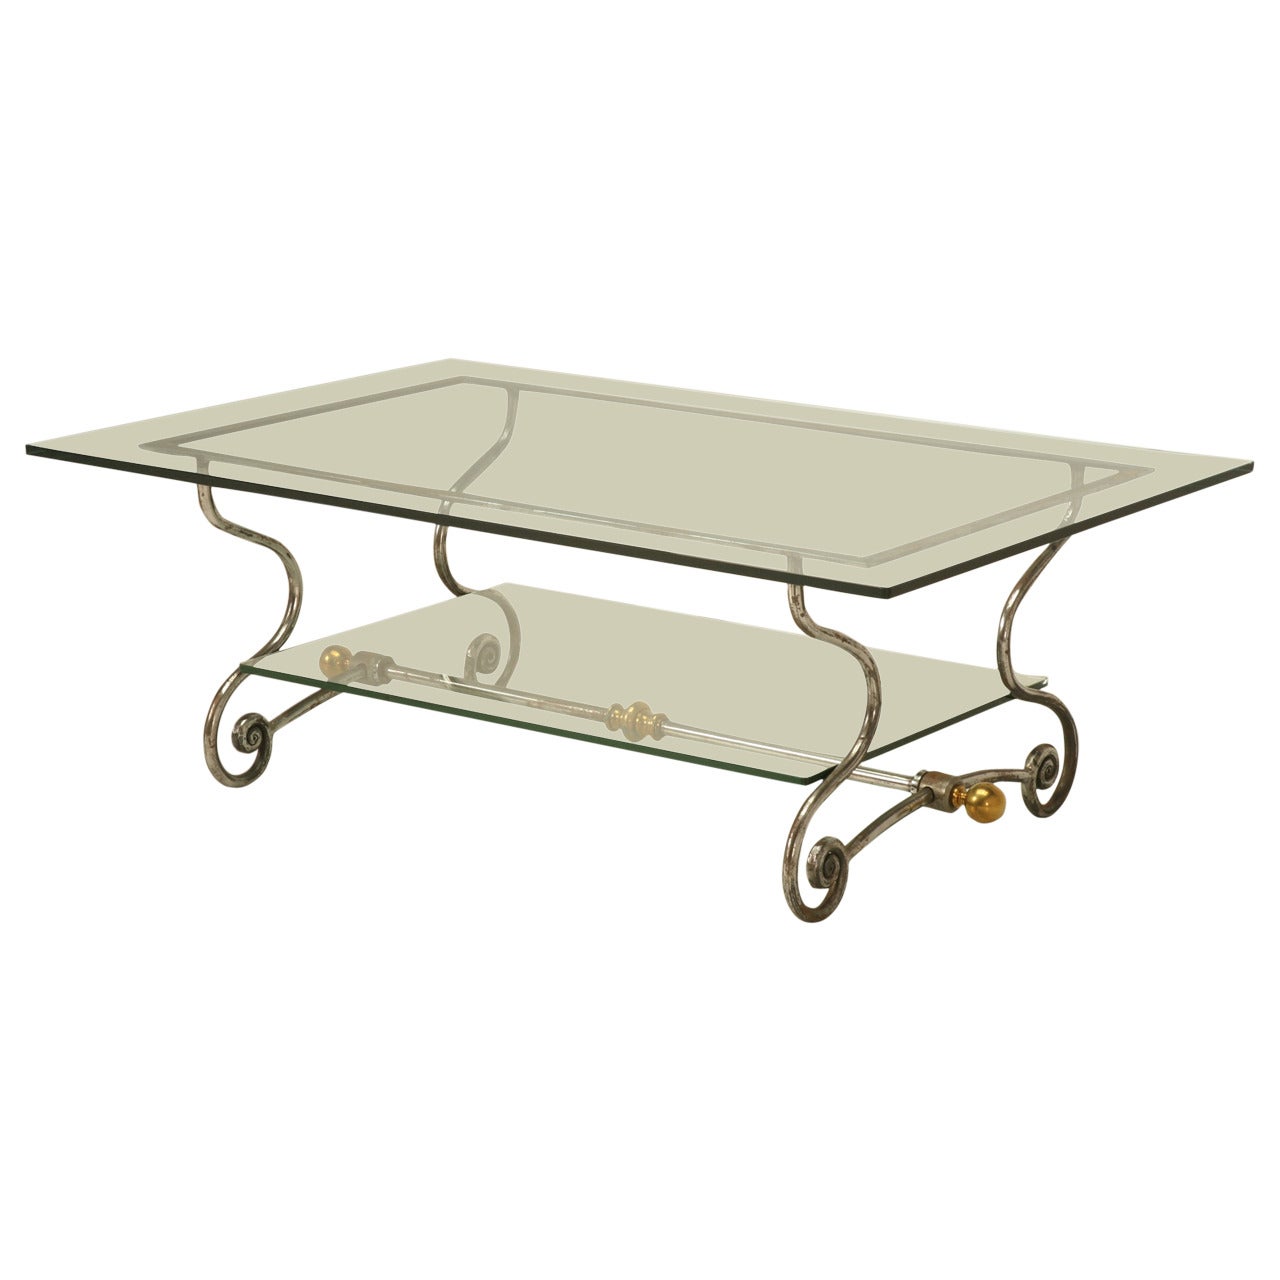 French Glass, Steel and Brass Two-Tier Coffee Table Mid-Century Modern, c1960's For Sale